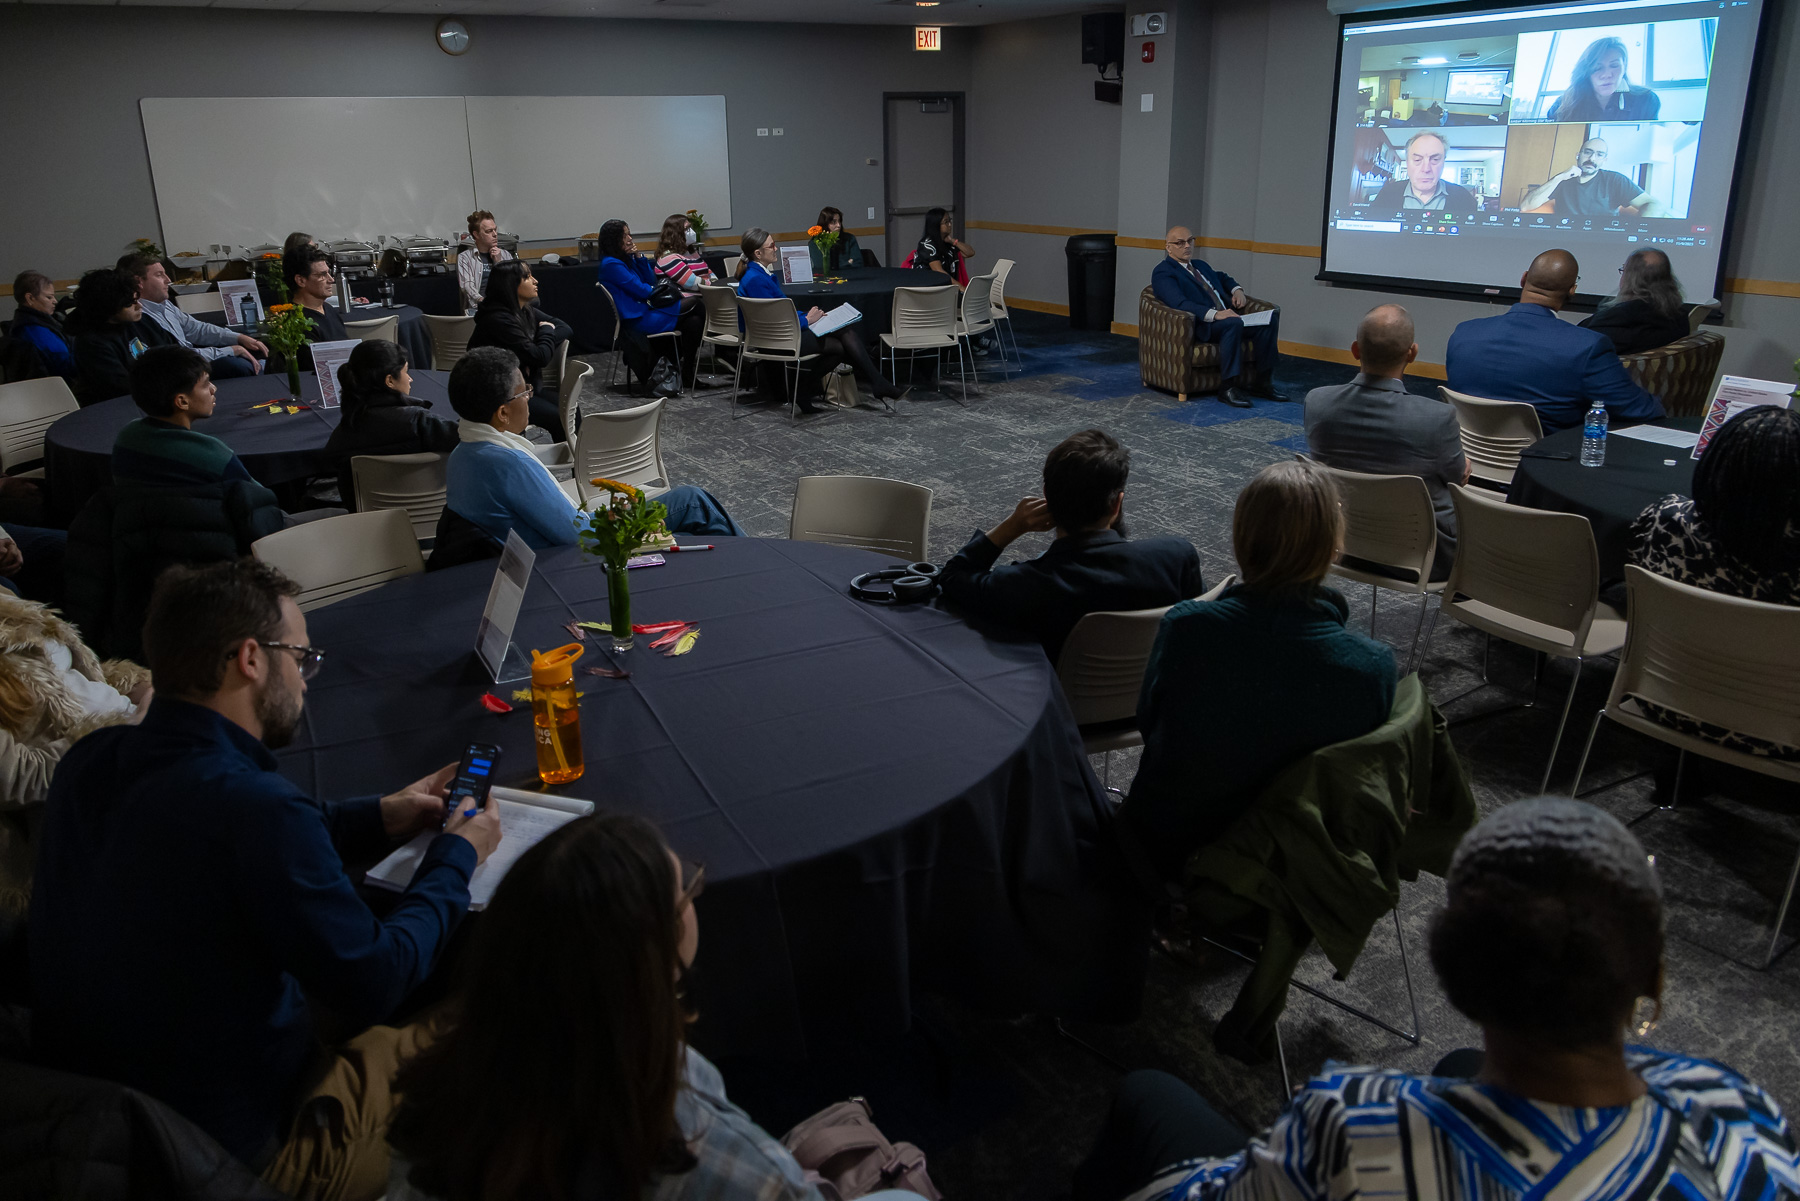 Later in the week faculty, staff and students attended the Native Peoples Heritage Month event: Lakota Nation vs. United States Discussion Panel on Thursday. (Photo by Jeff Carrion / DePaul University) 